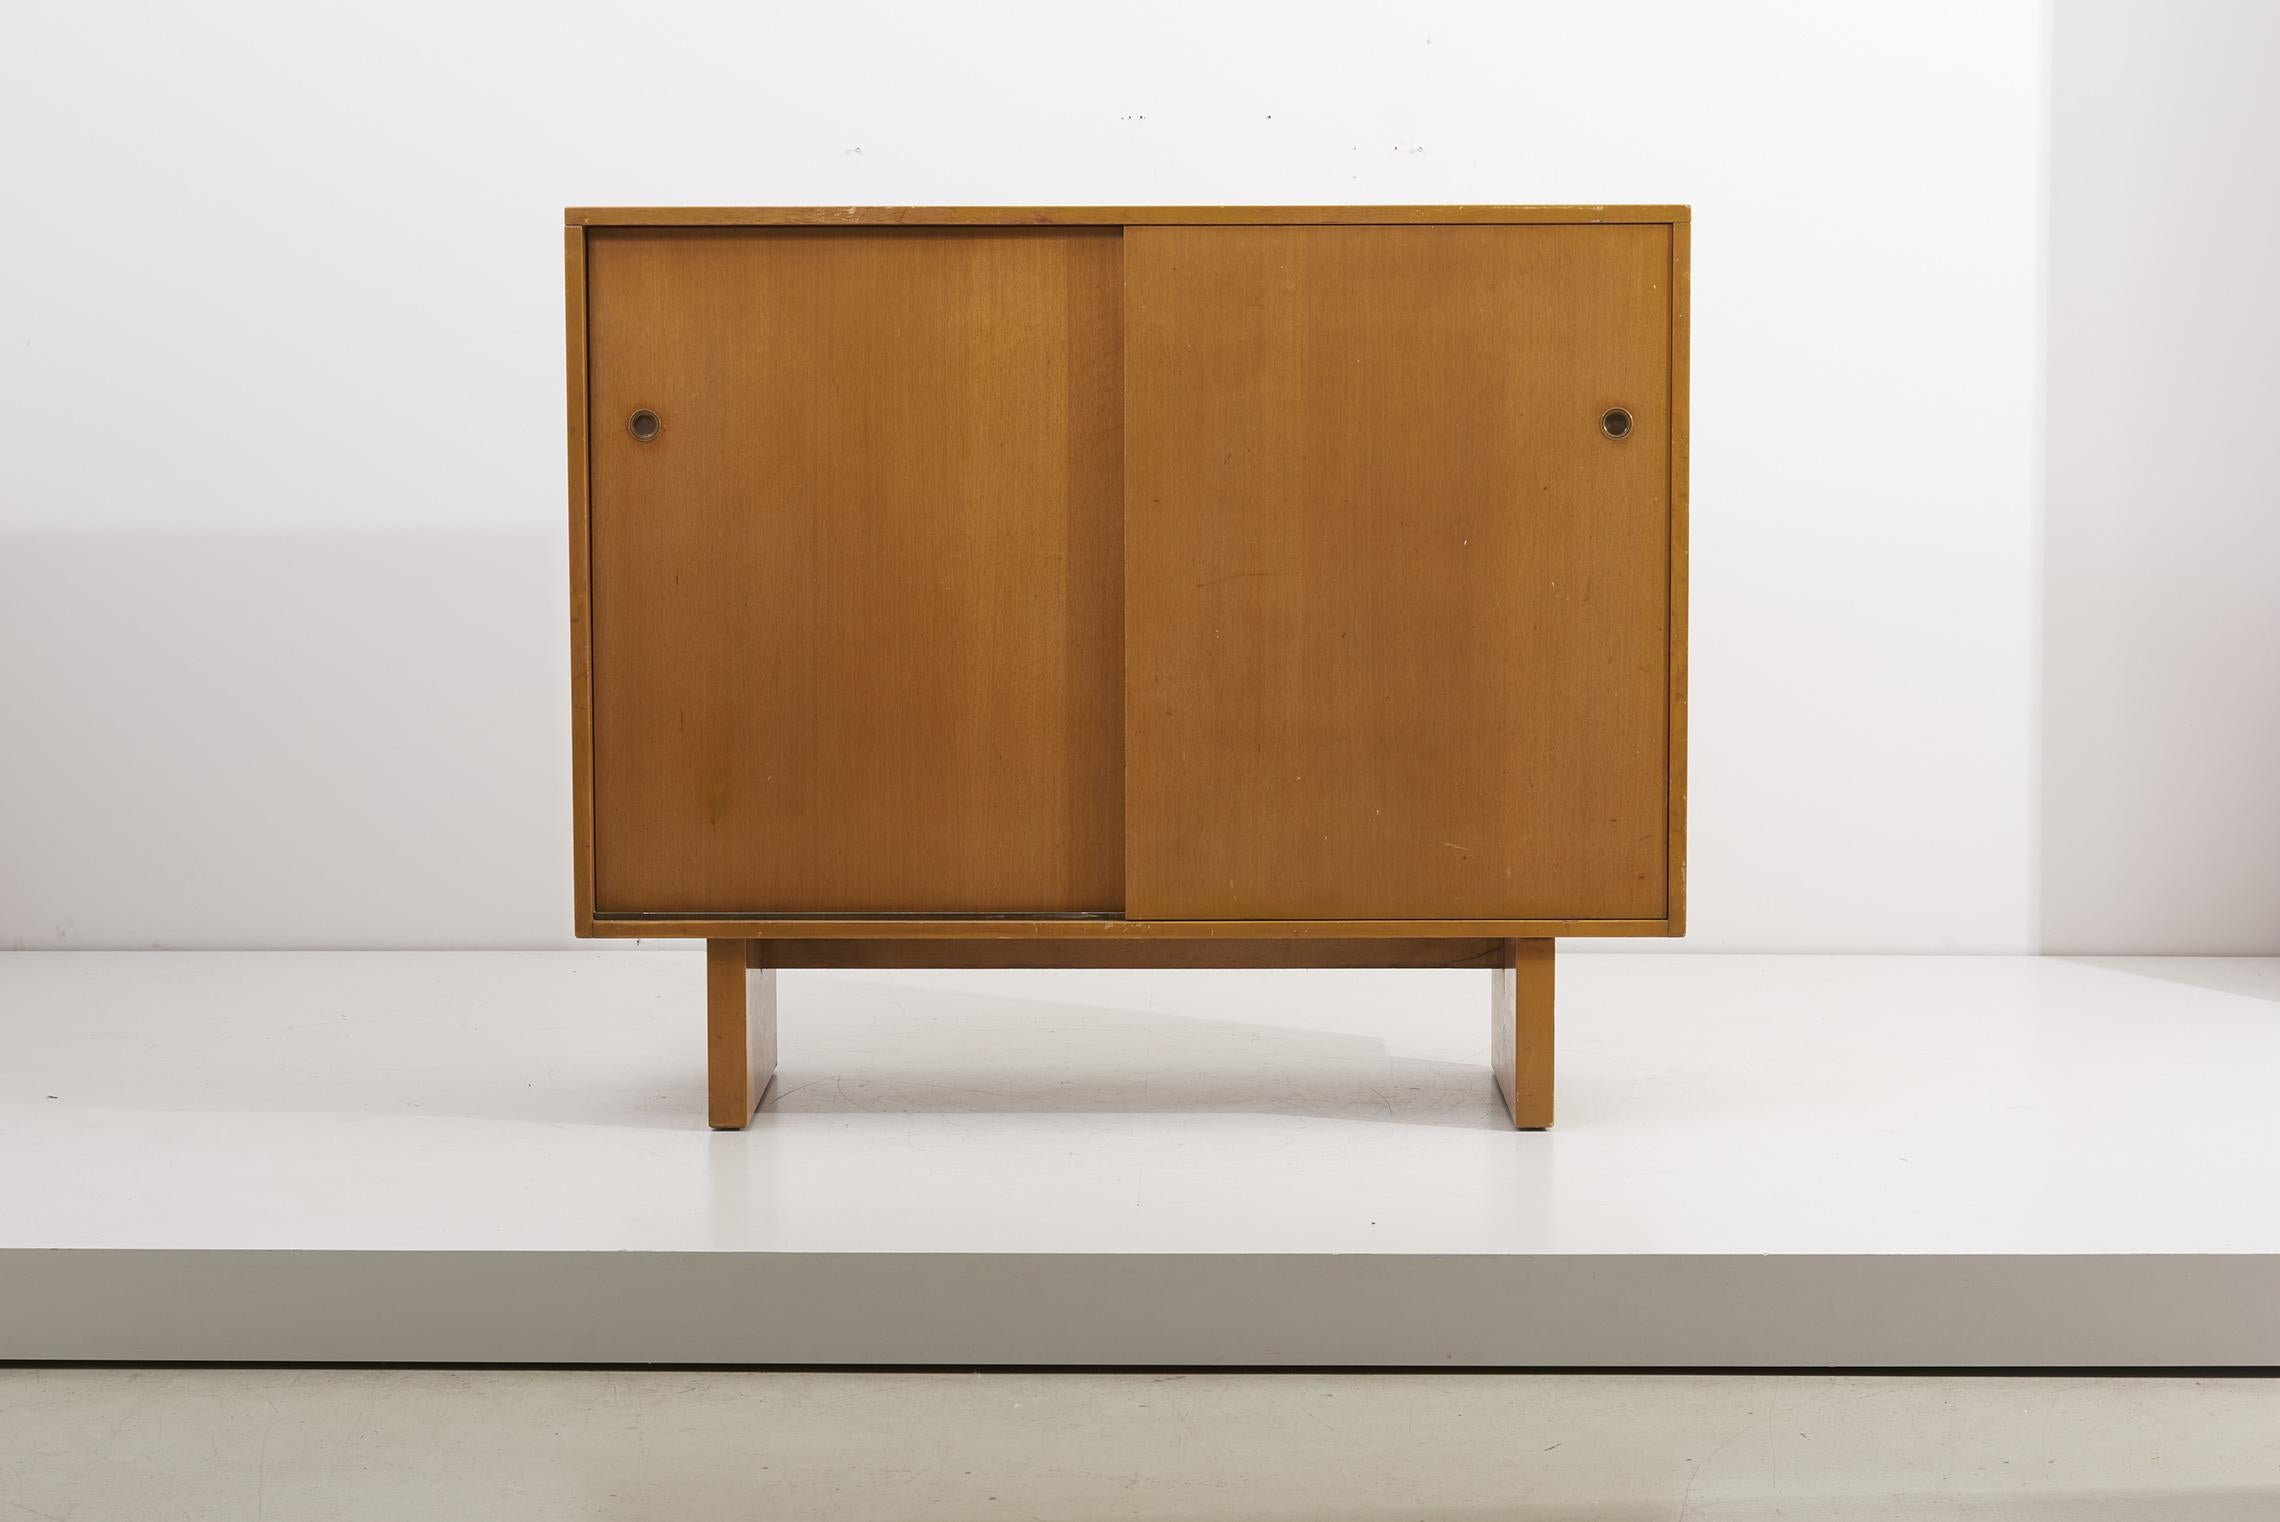 Wooden cabinet, designed in 1950s by James Wylie and manufactured by Widdicomb in USA.
Two sliding doors with round brass pulls; 7 large drawers and 6 small drawers.